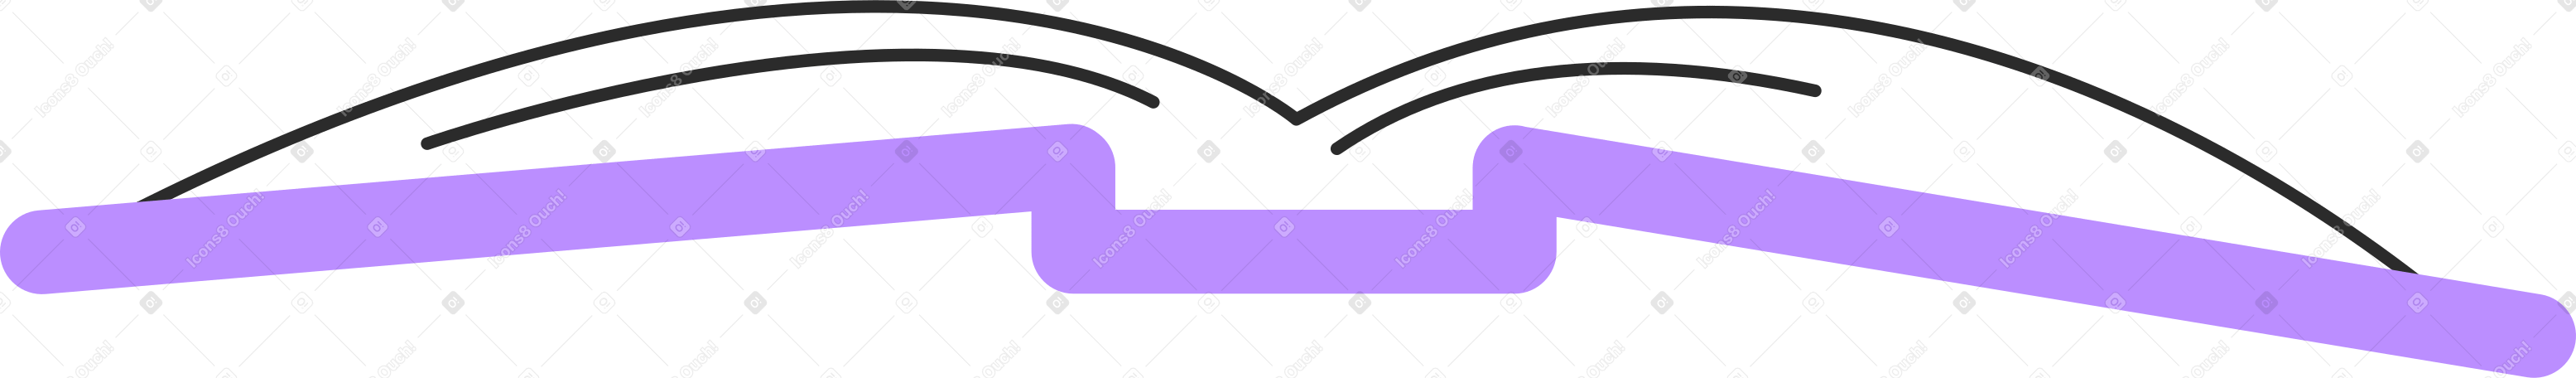 open lilac book PNG、SVG